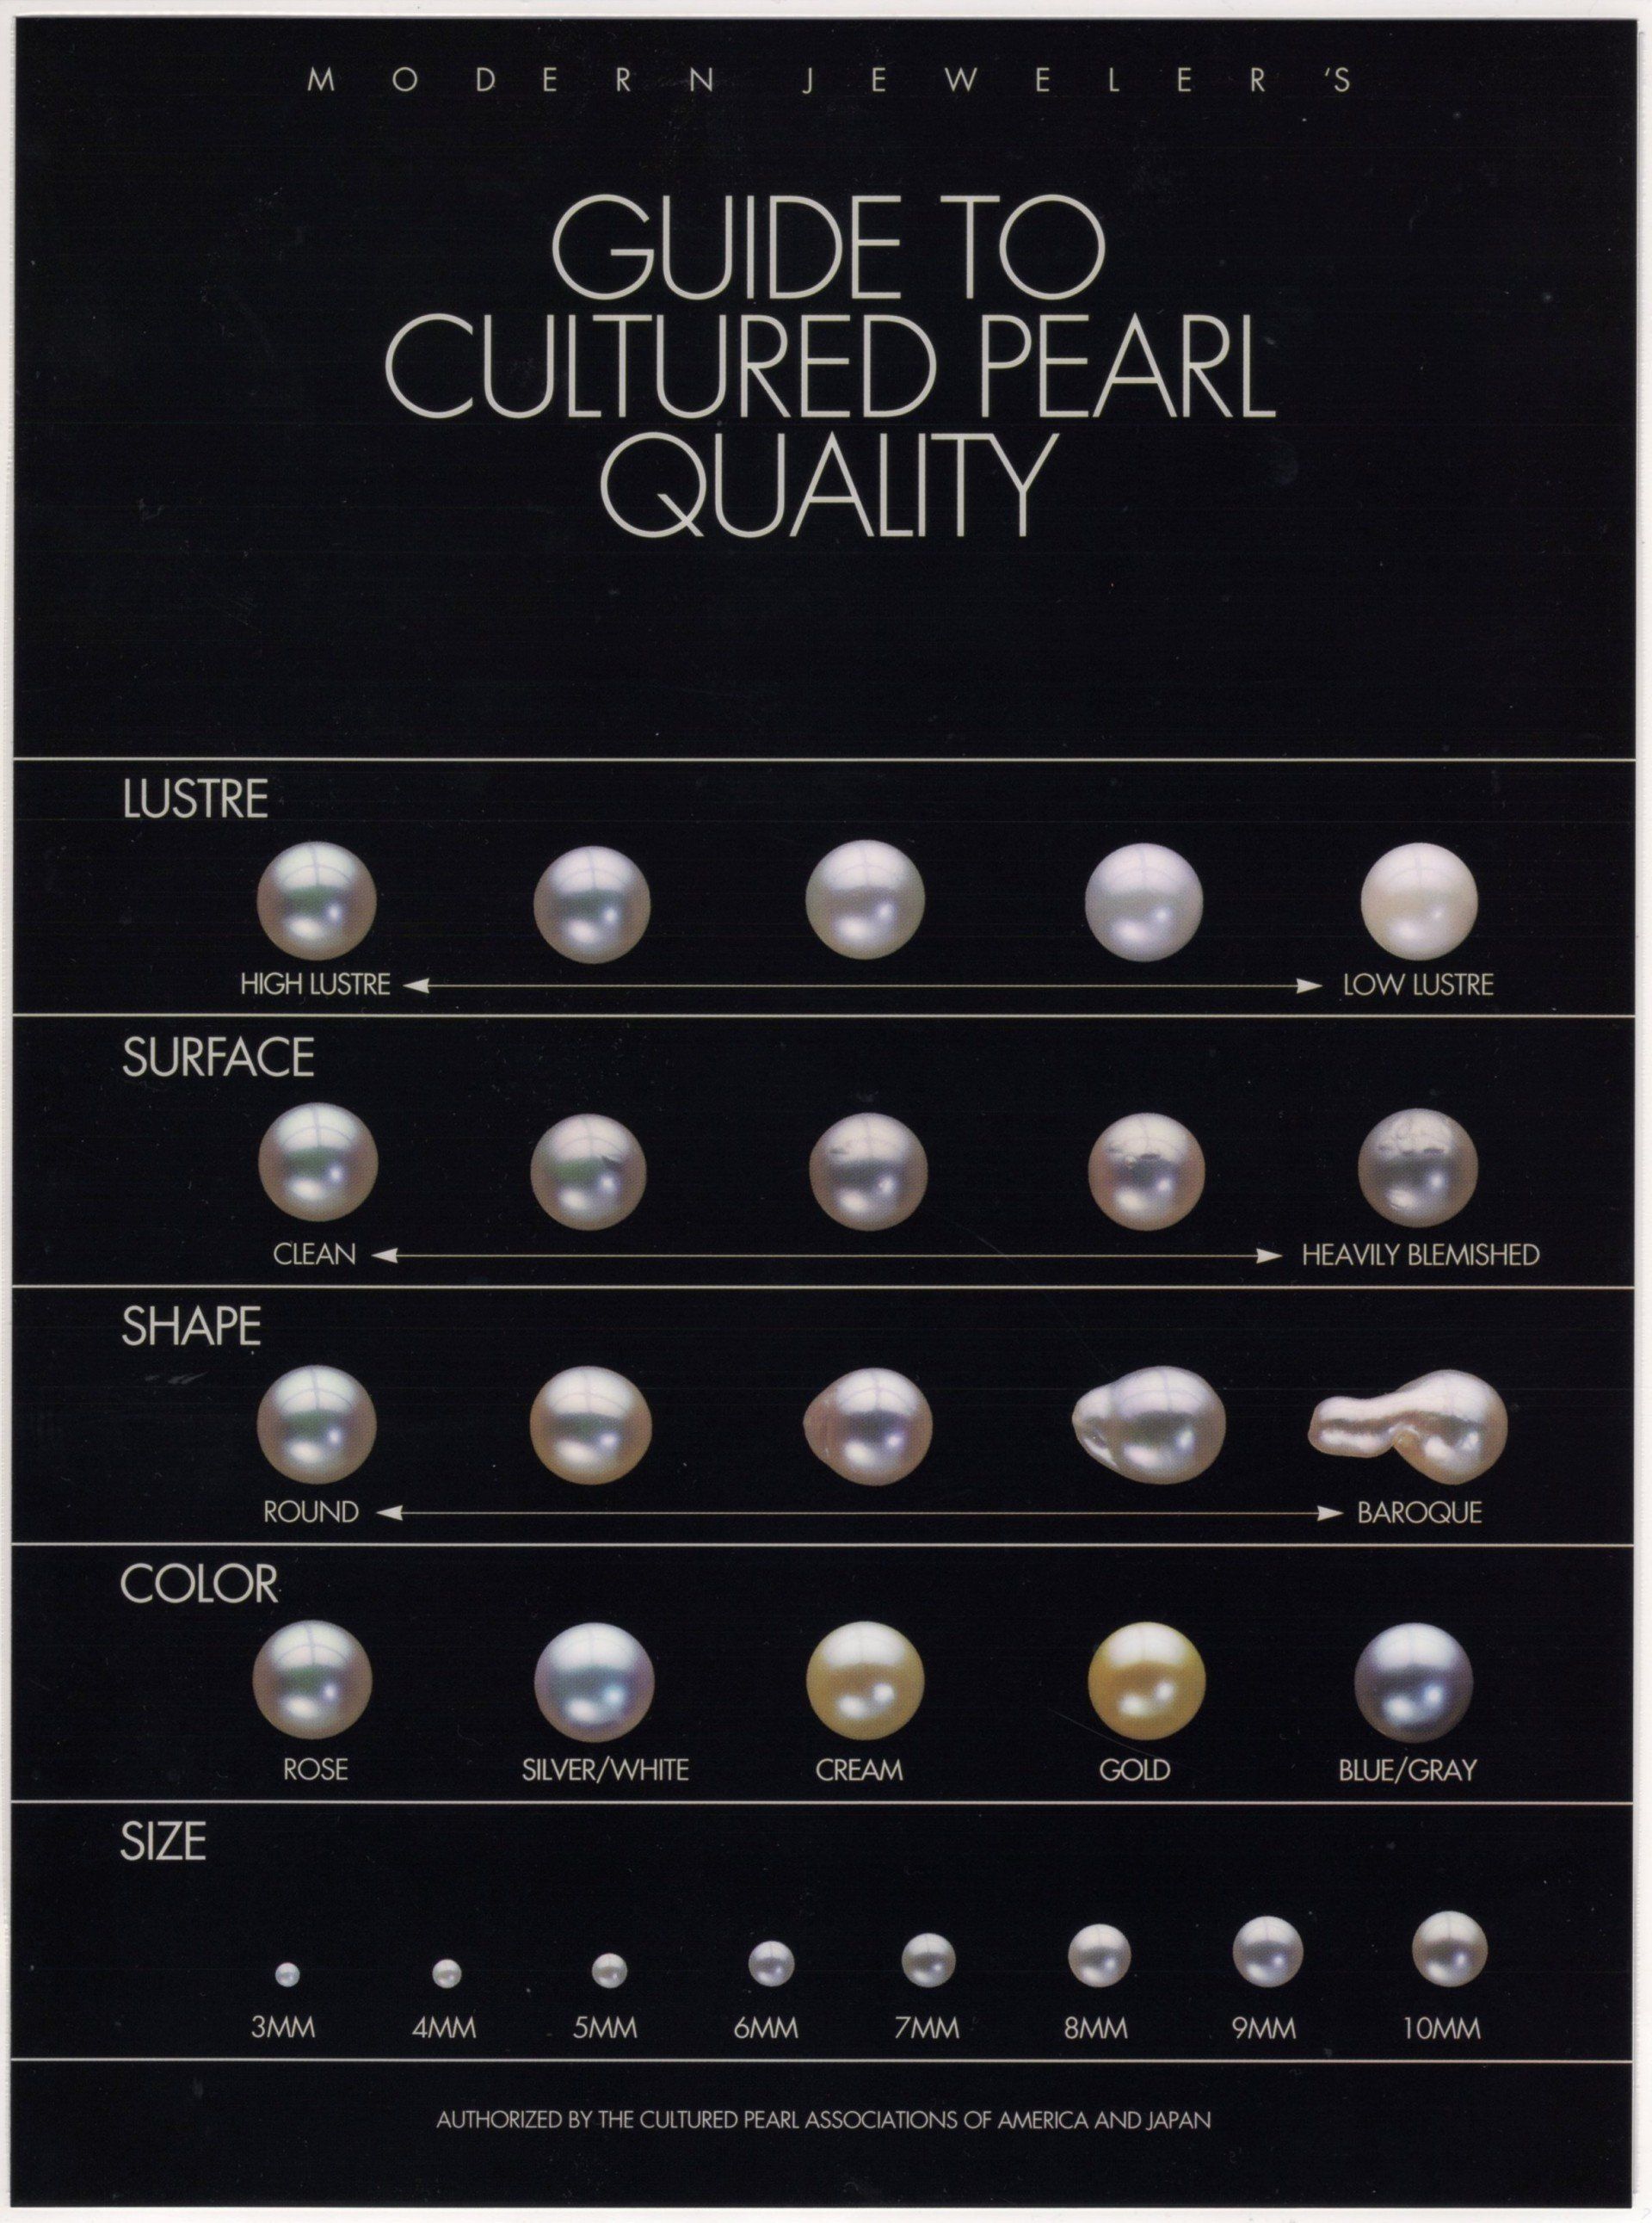 Guide to Cultured Pearl Quality — Brisbane, Qld — Girls Love Pearls